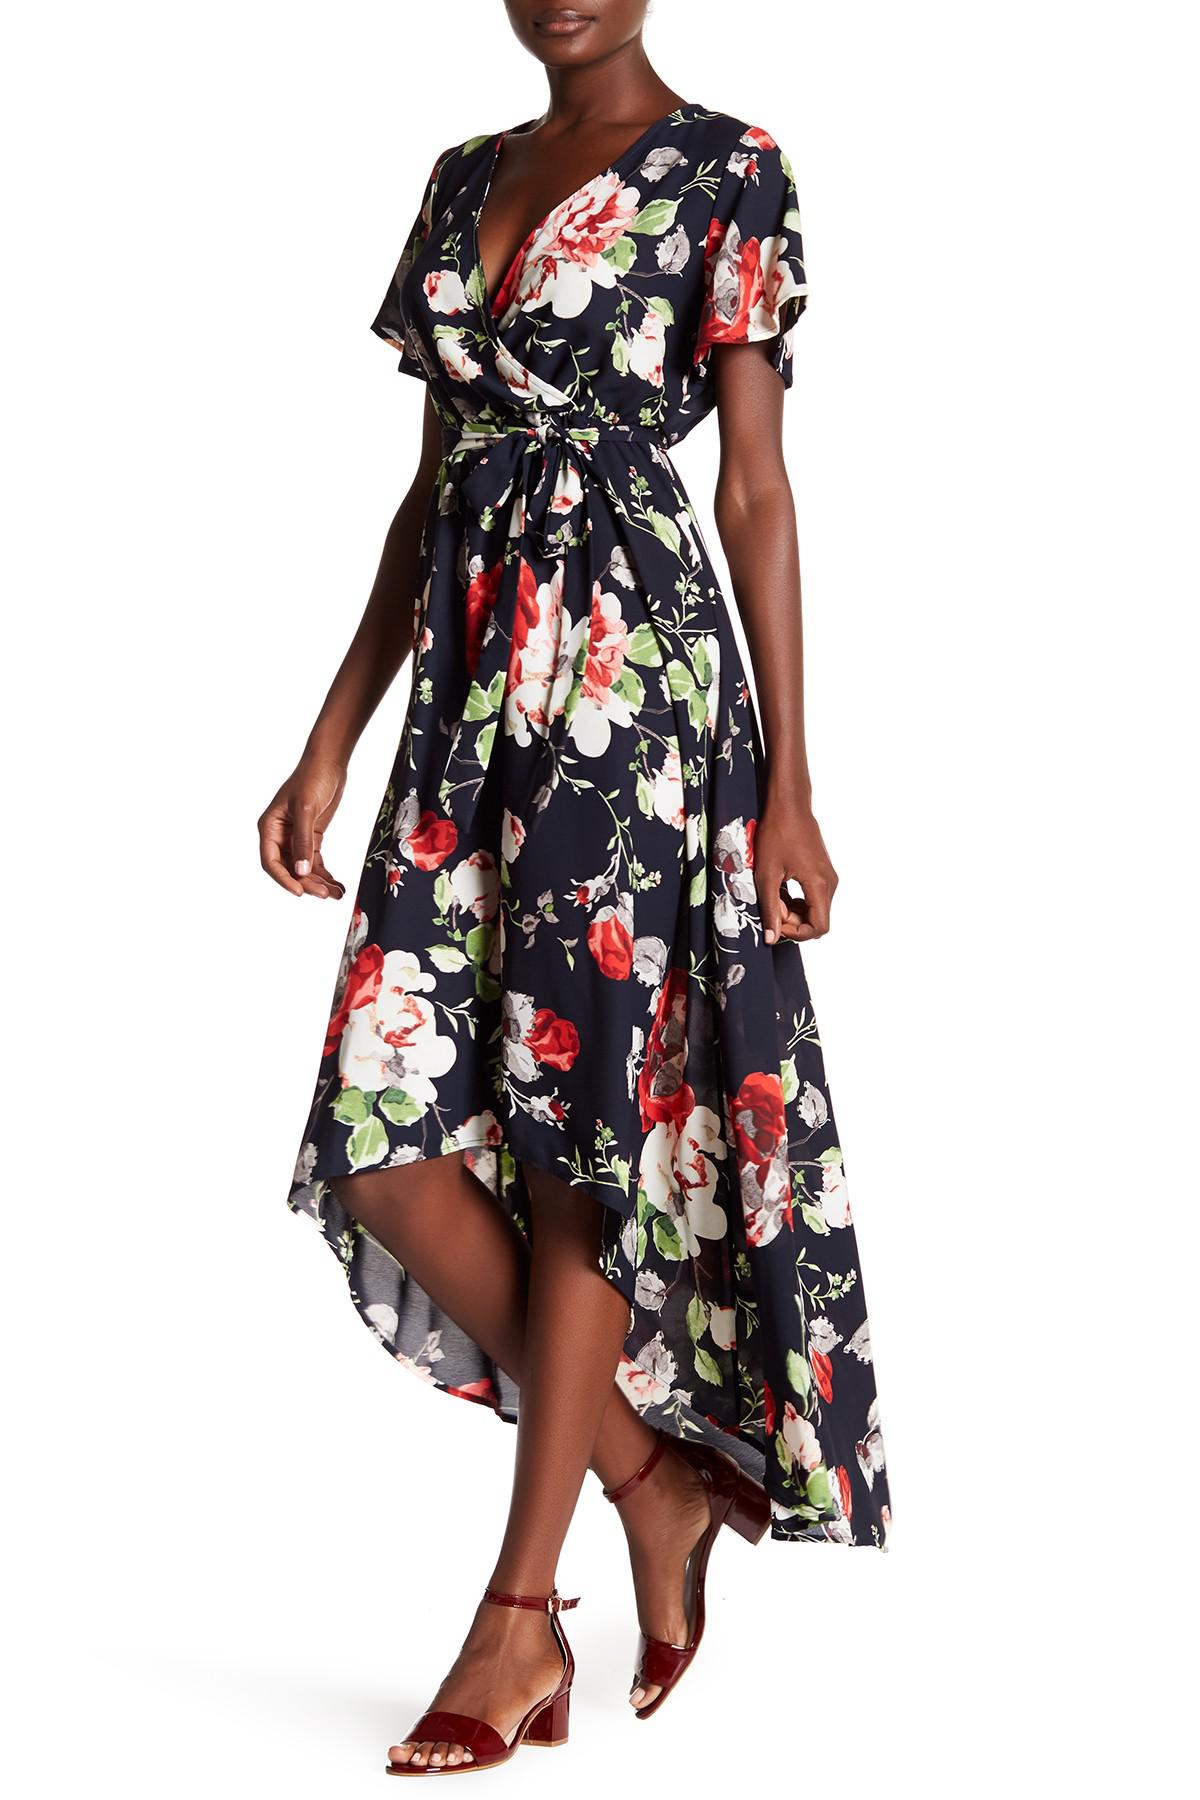 West Kei Synthetic Floral Print Wrap Hi-lo Dress - Lyst